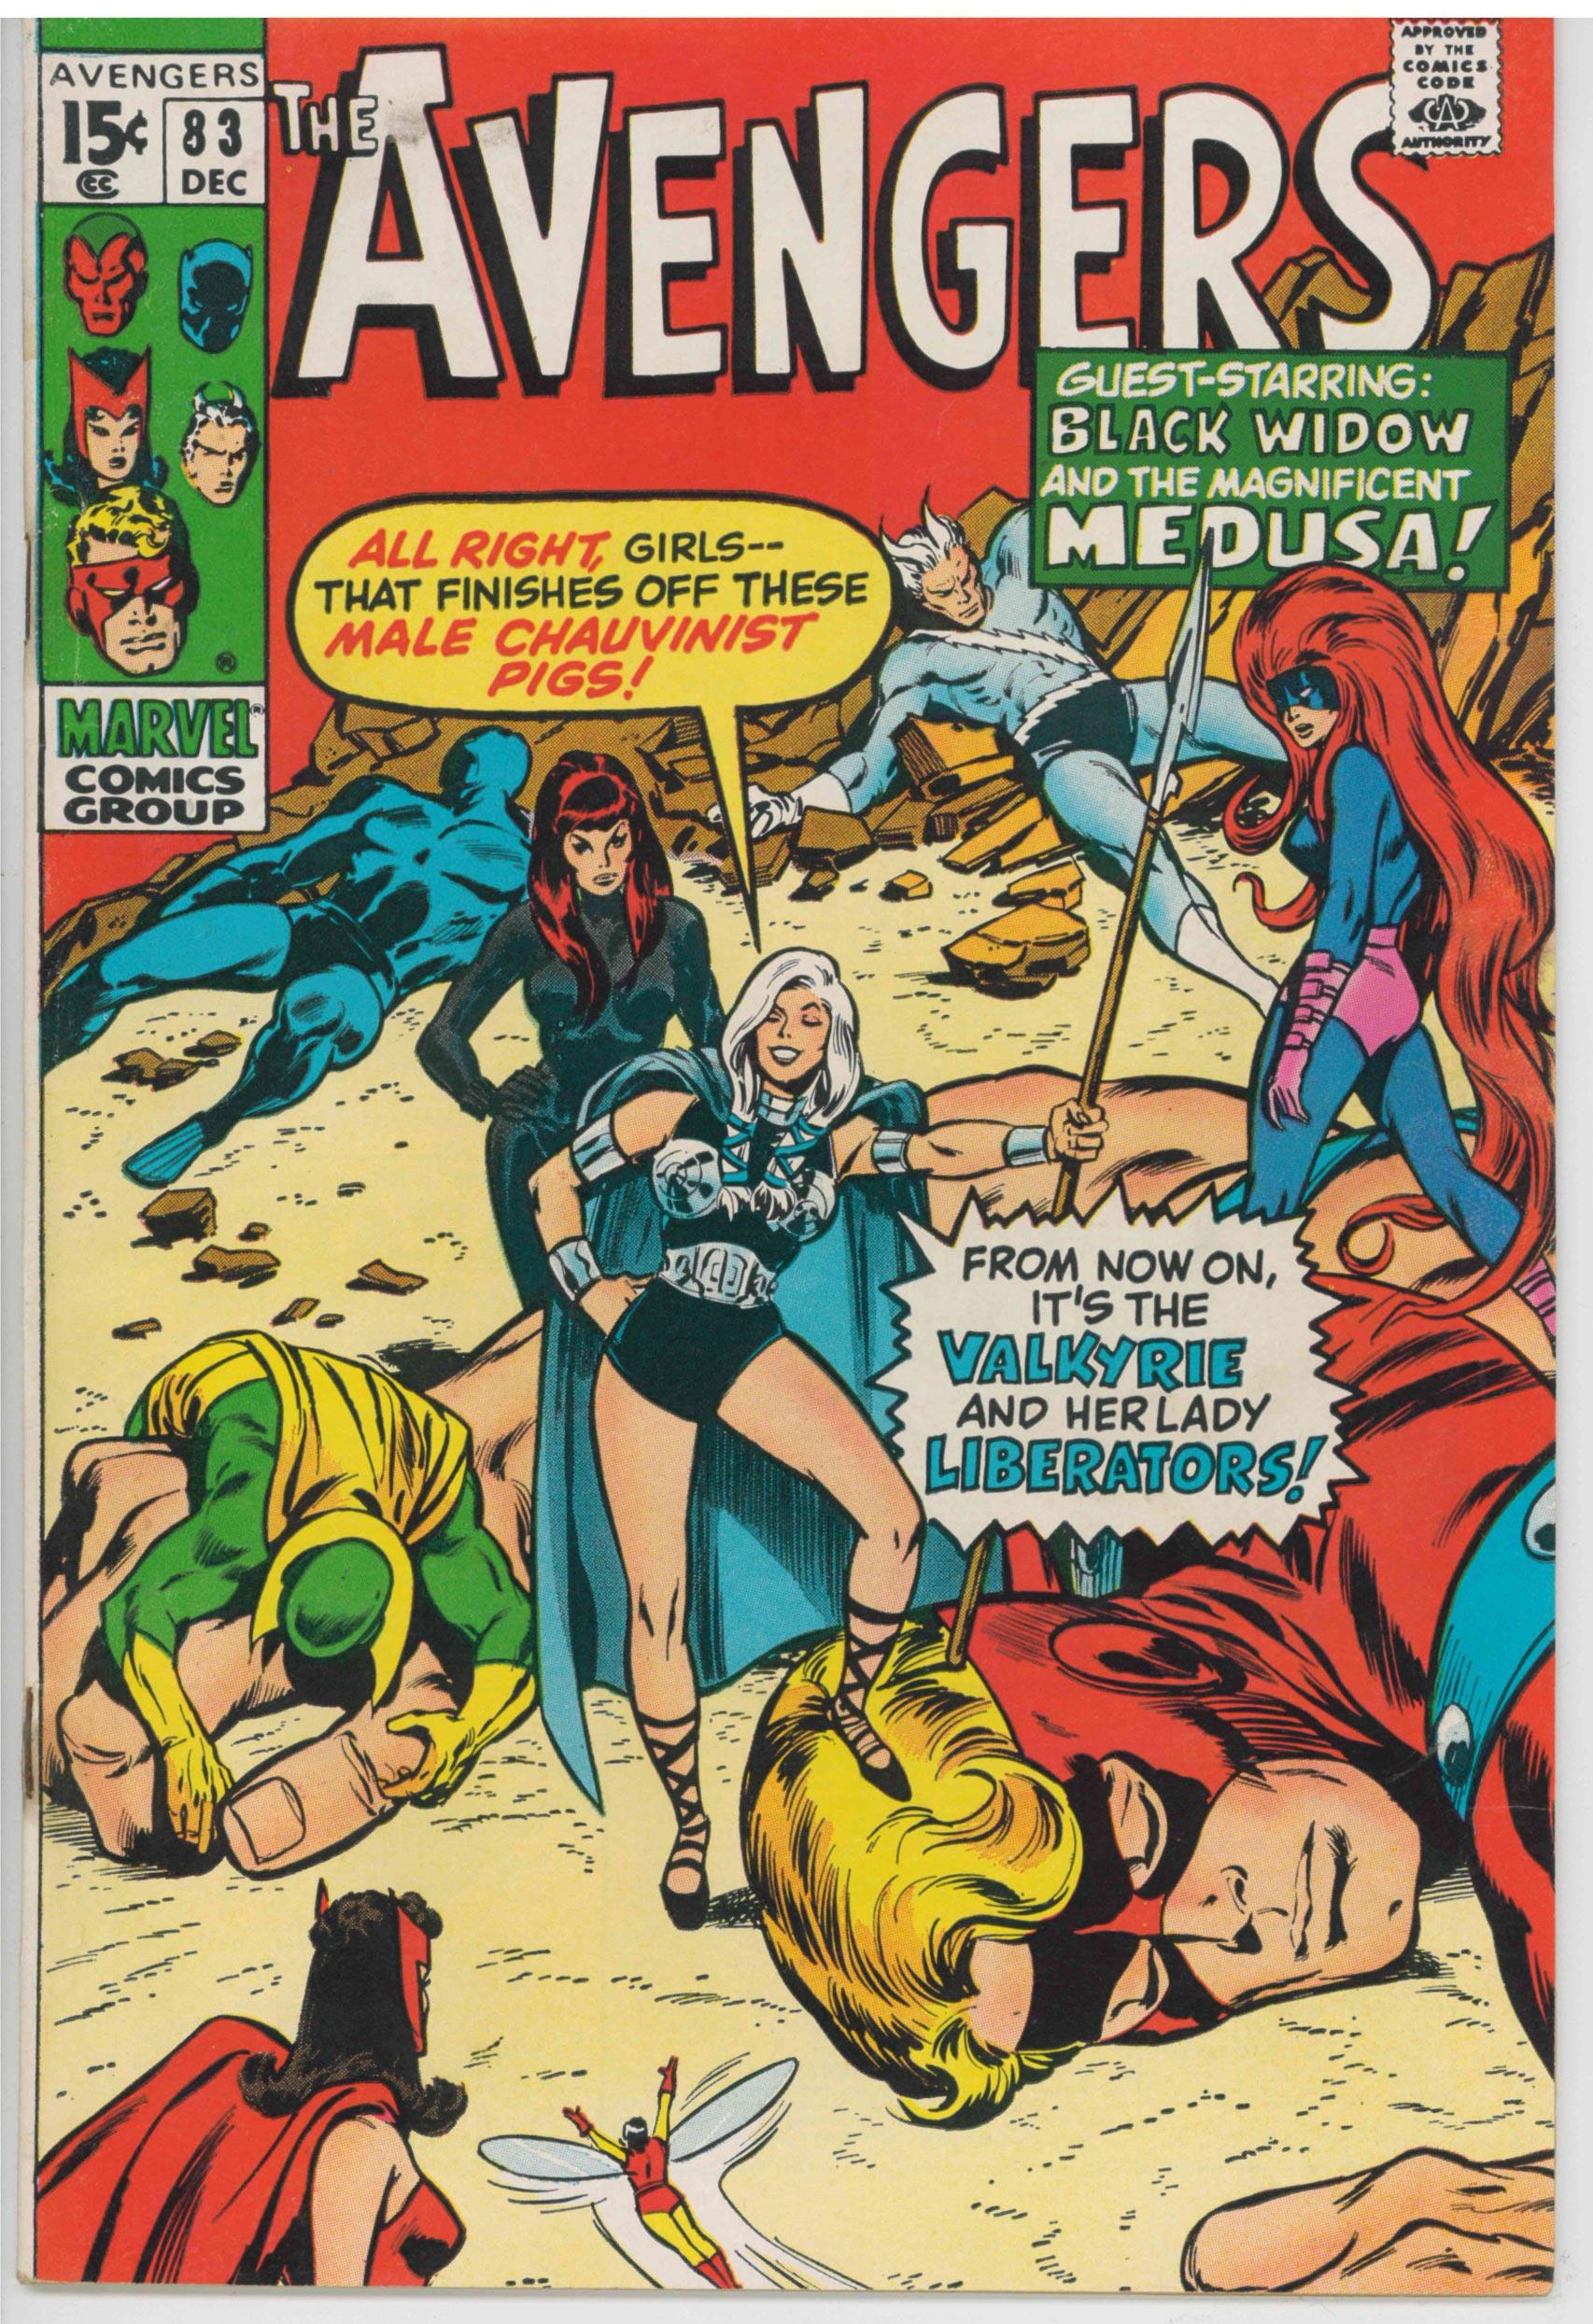 AVENGERS (1963) #83 (VG) - FIRST APPEARANCE VALKYRIE - Kings Comics